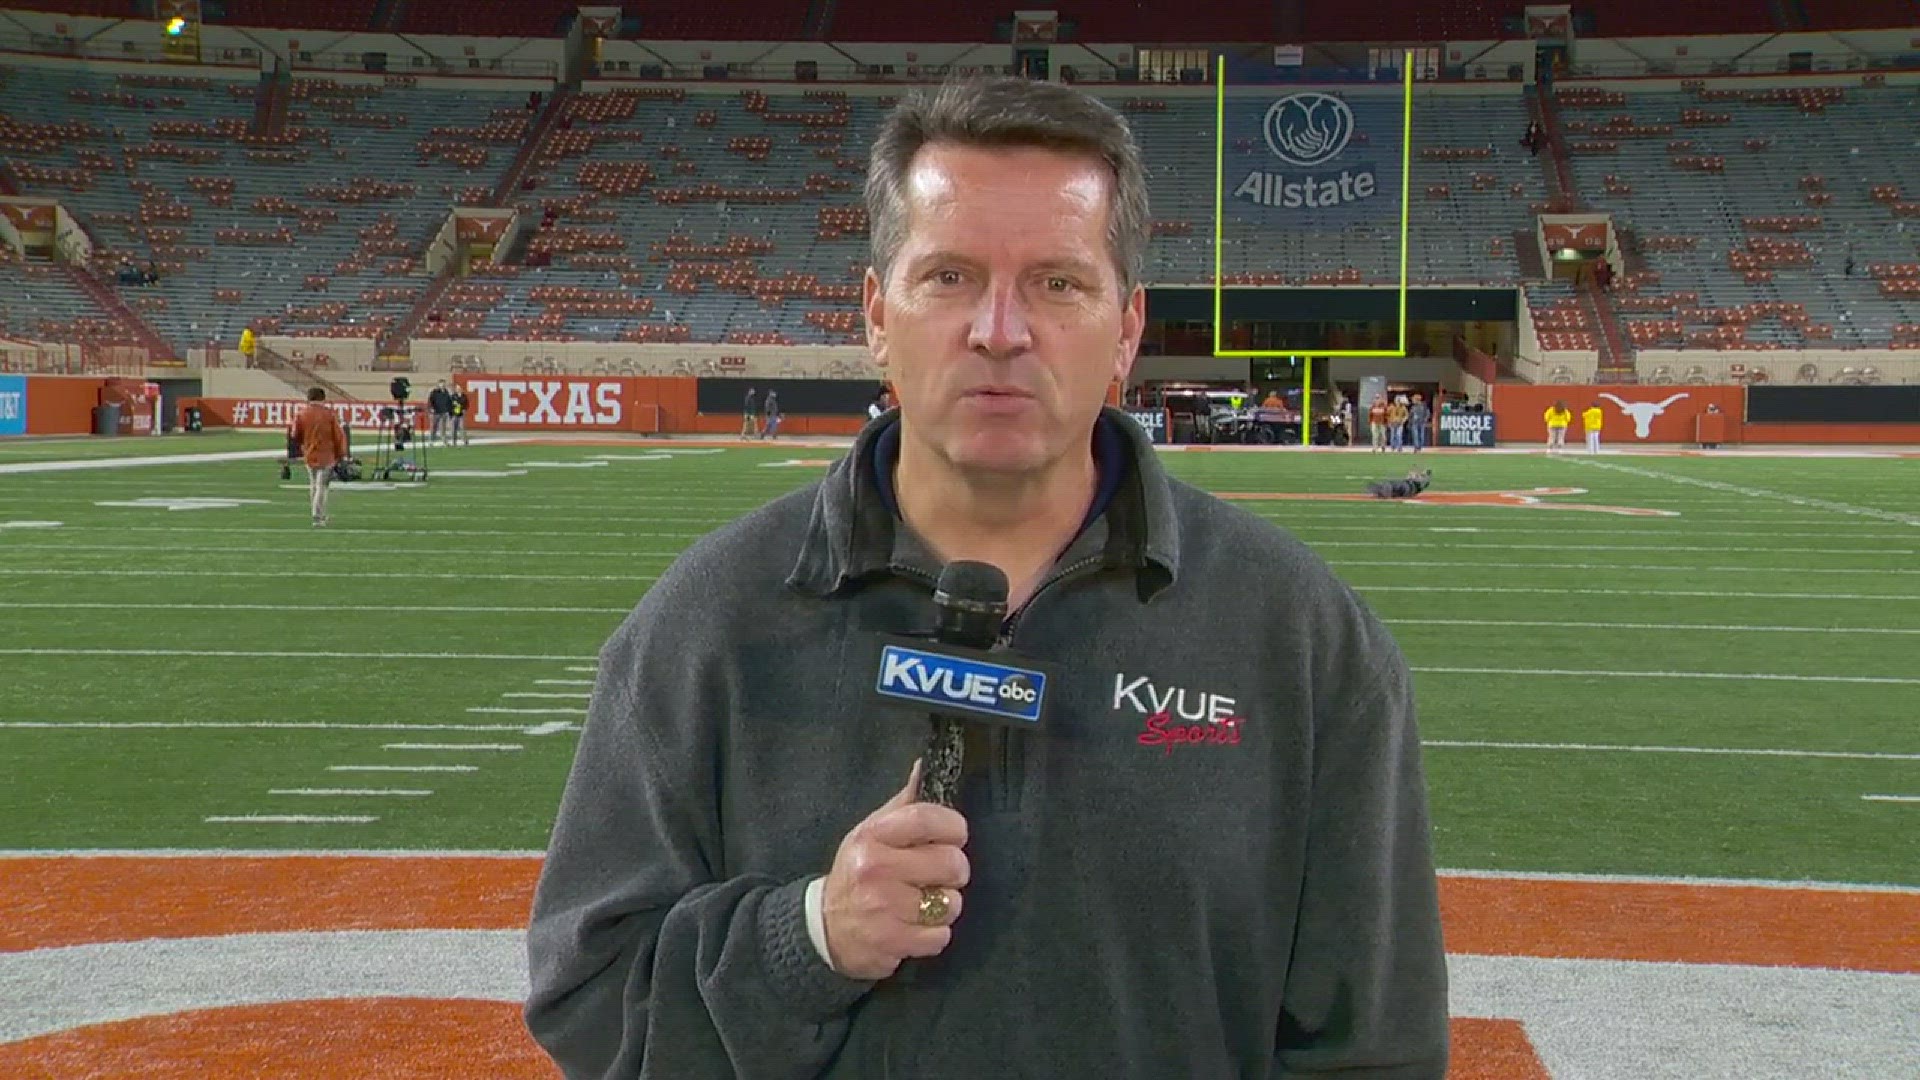 KVUE's Mike Barnes shows how Texas Tech made a comeback in the final two minutes to beat Texas 27-23.